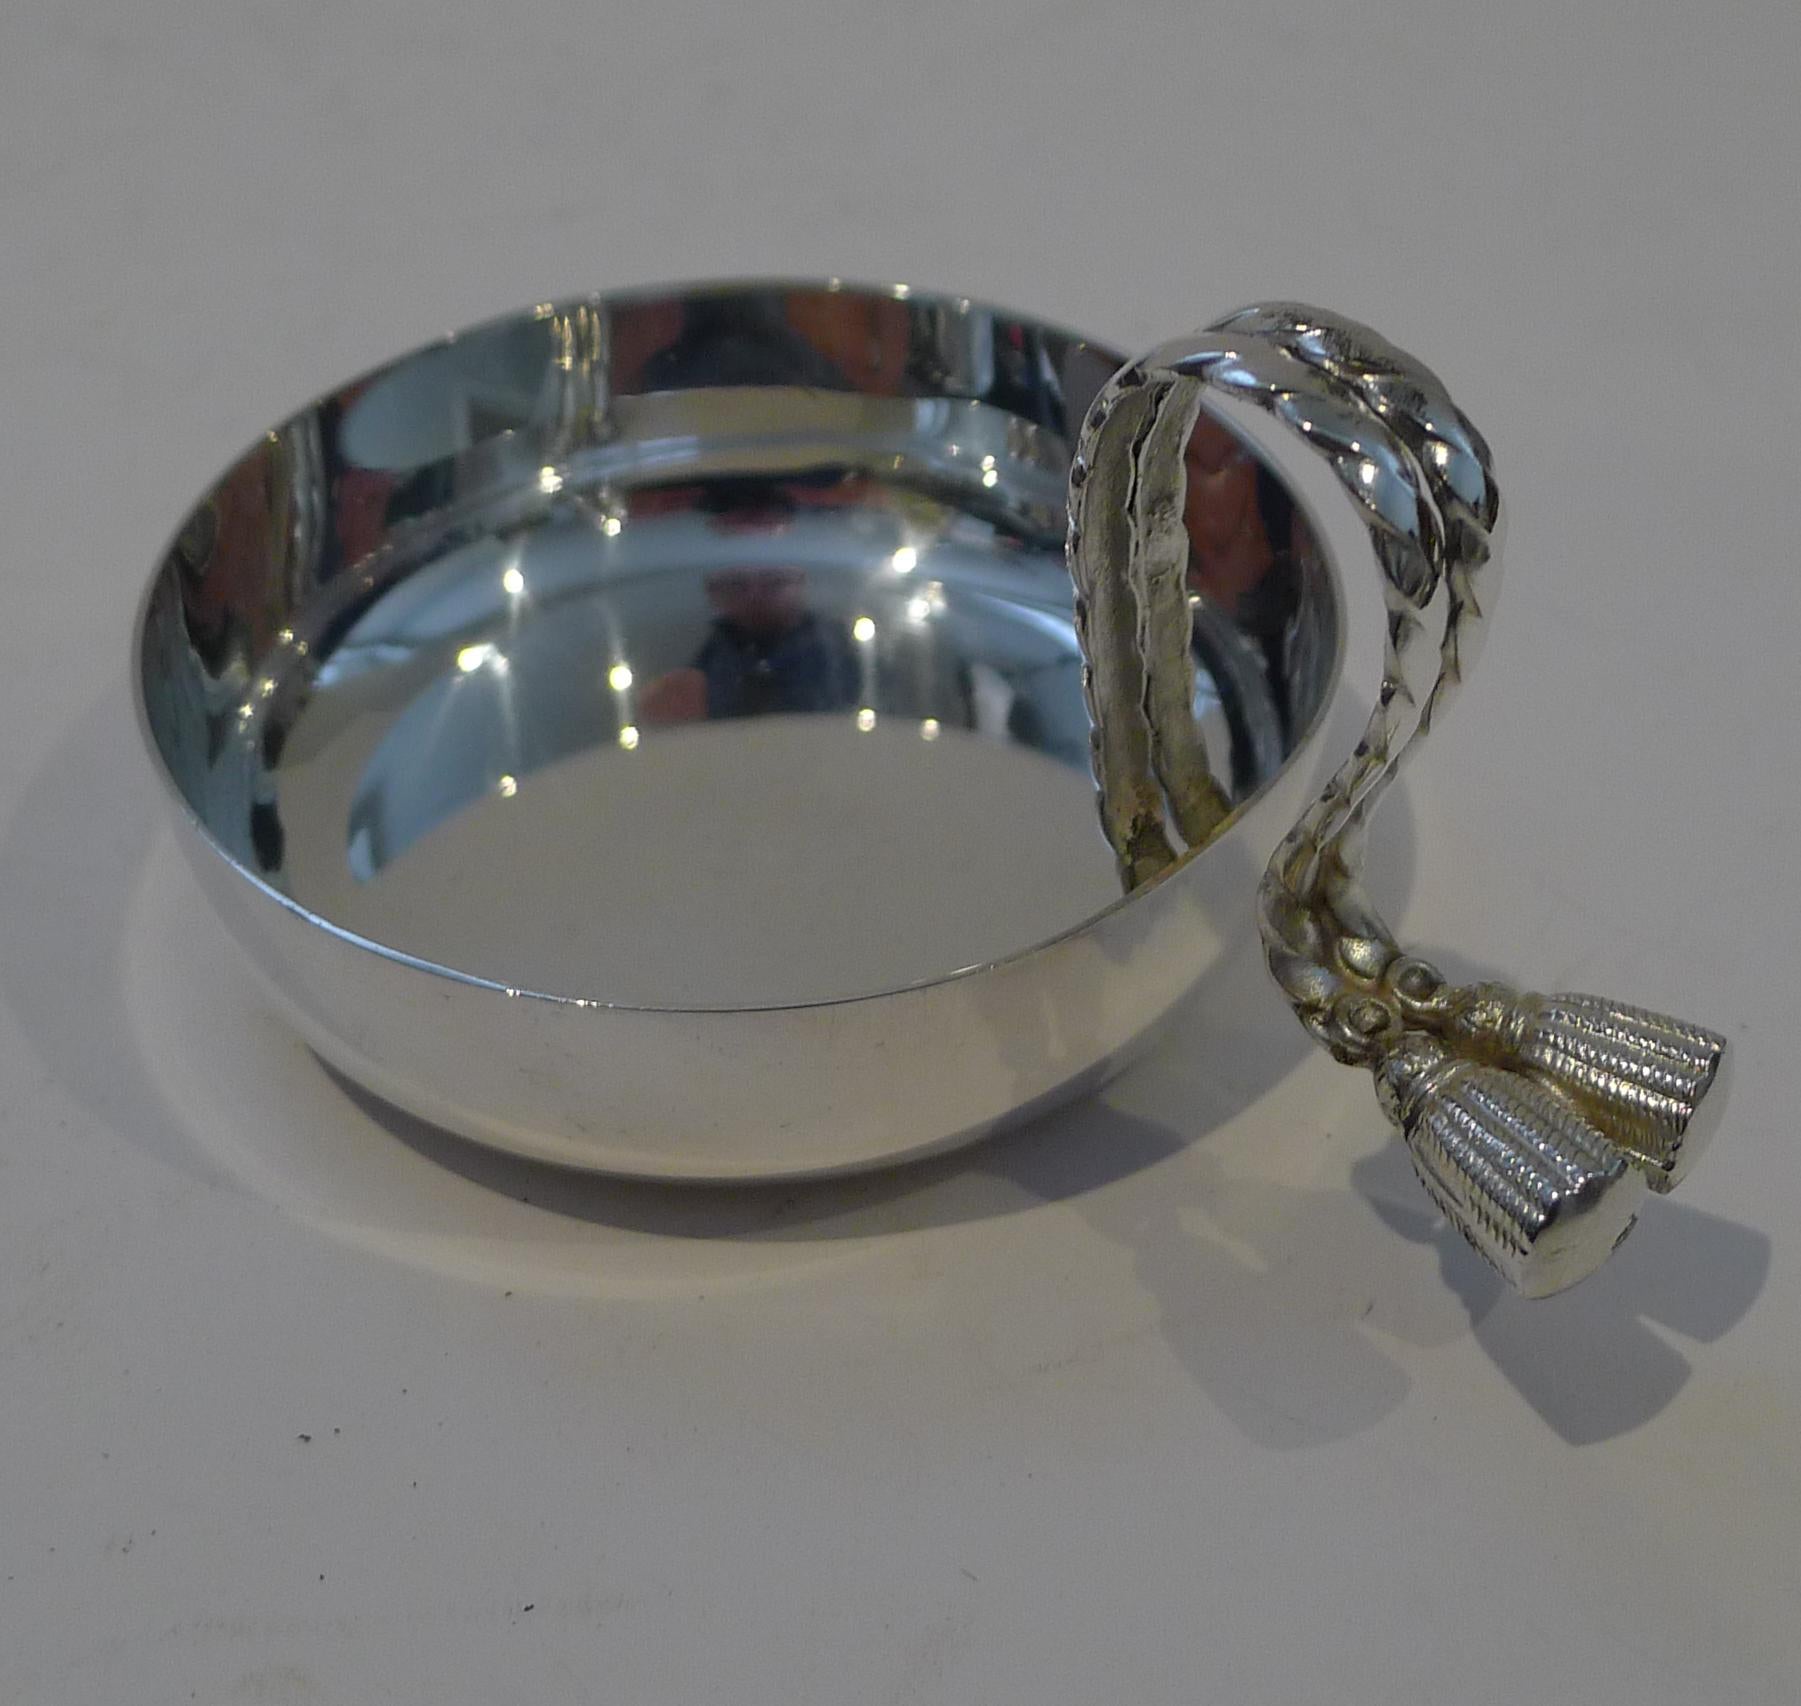 A rare smaller example of Maria Pergay's tassel decorated dish or vide poche; perfect if you are looking to add to a grouping, this smaller size is hard to find.

Made from silver plate, this dish has just returned from our silversmiths' workshop